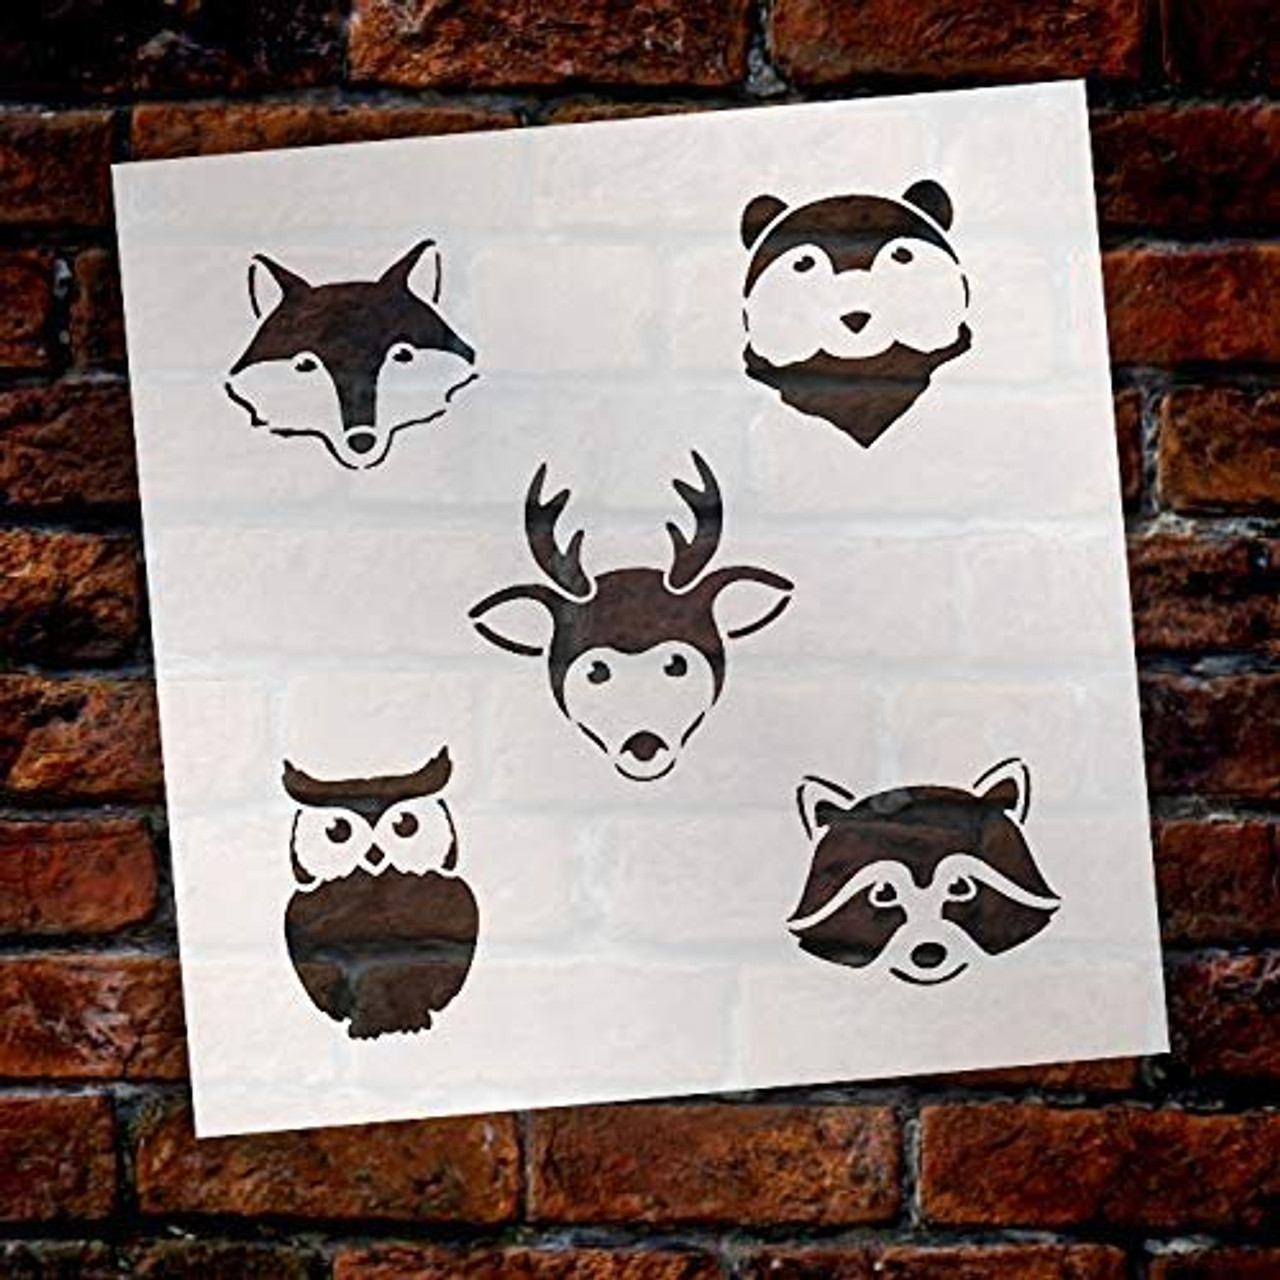 Woodland Animal Faces Stencil by StudioR12 | DIY Nursery | Nature Decor | Animal | Craft Home Decor | Reusable Mylar Template | Paint Wood Sign - Select Size